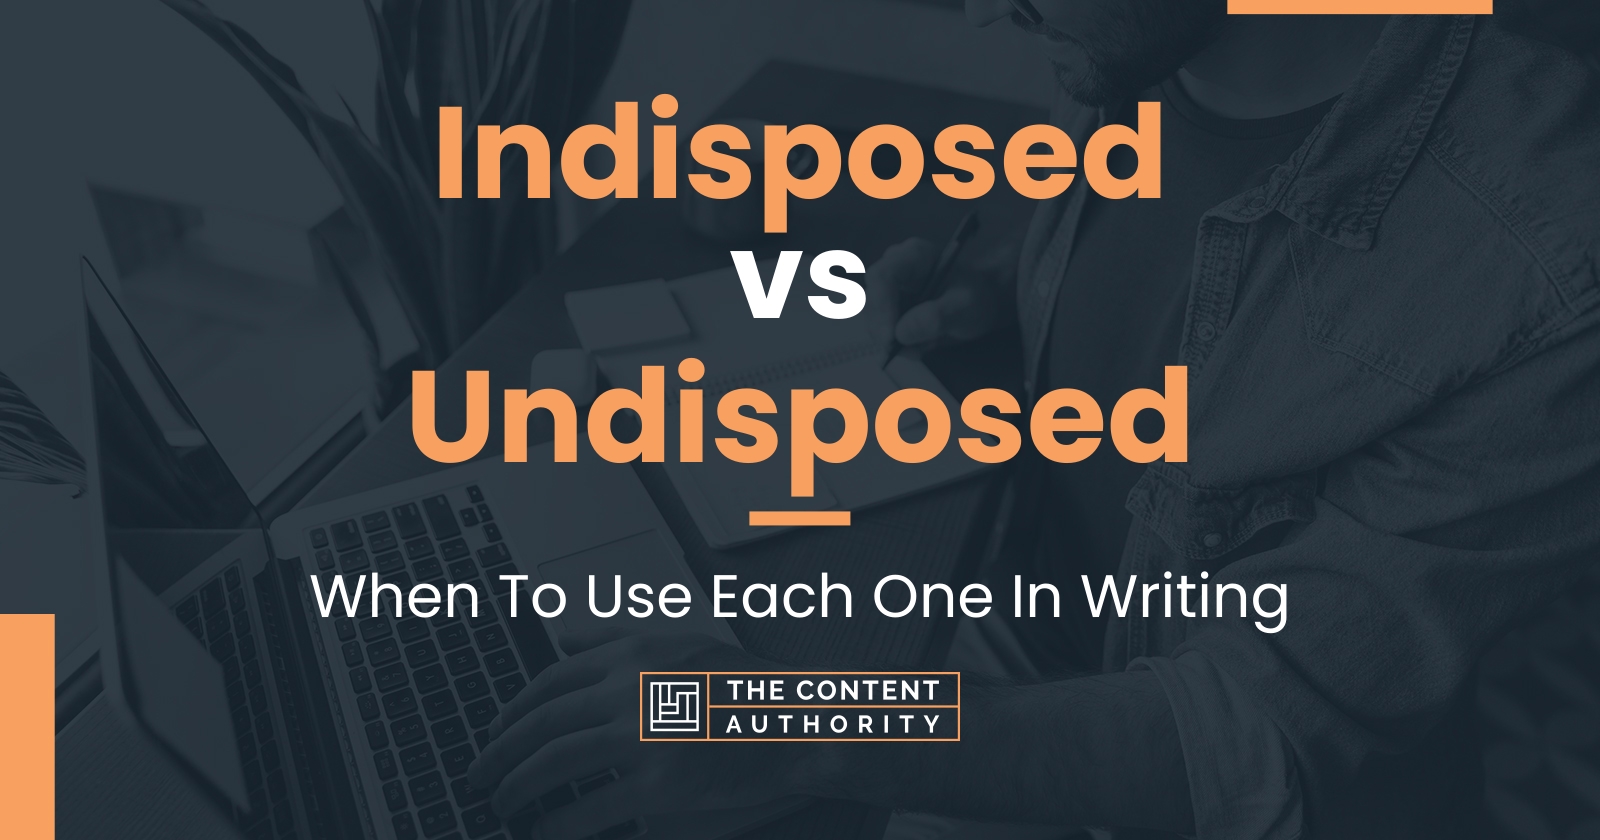 Indisposed vs Undisposed: When To Use Each One In Writing